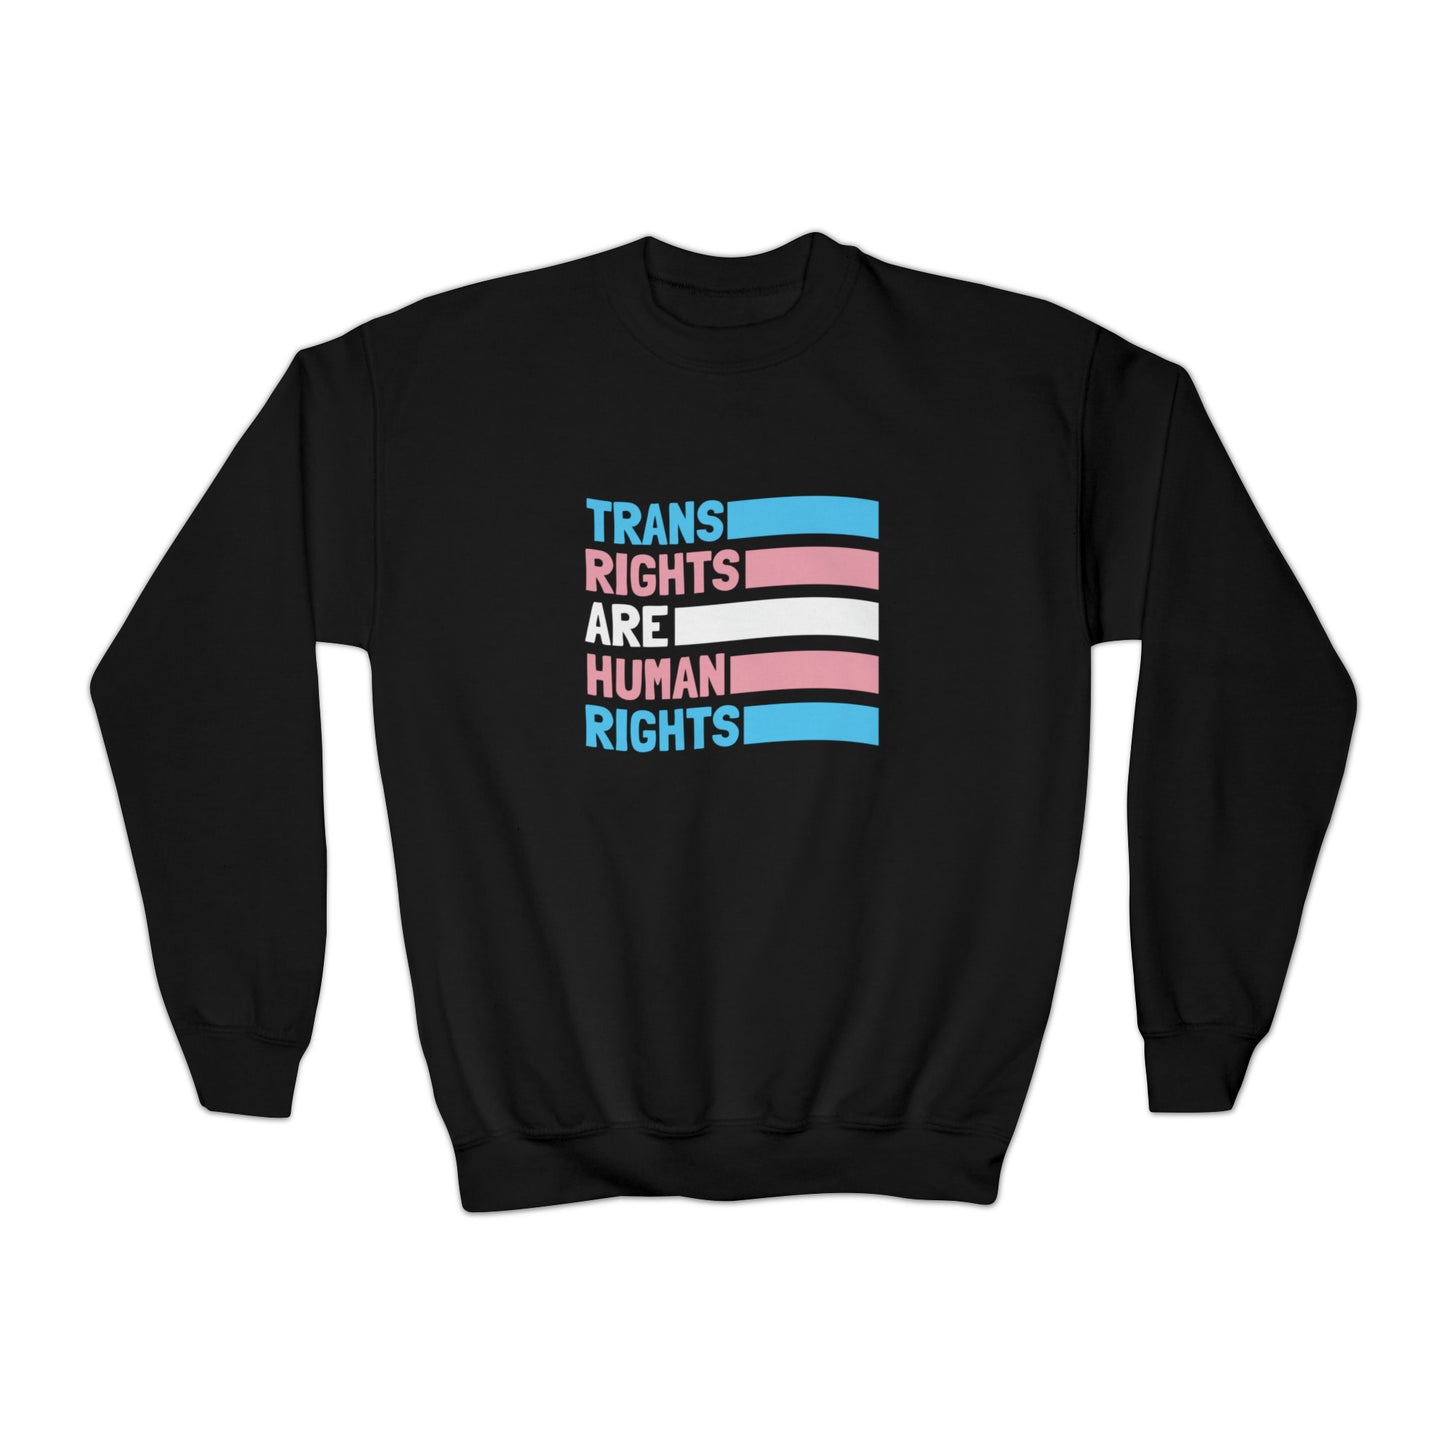 “Trans Rights Are Human Rights” Youth Sweatshirt